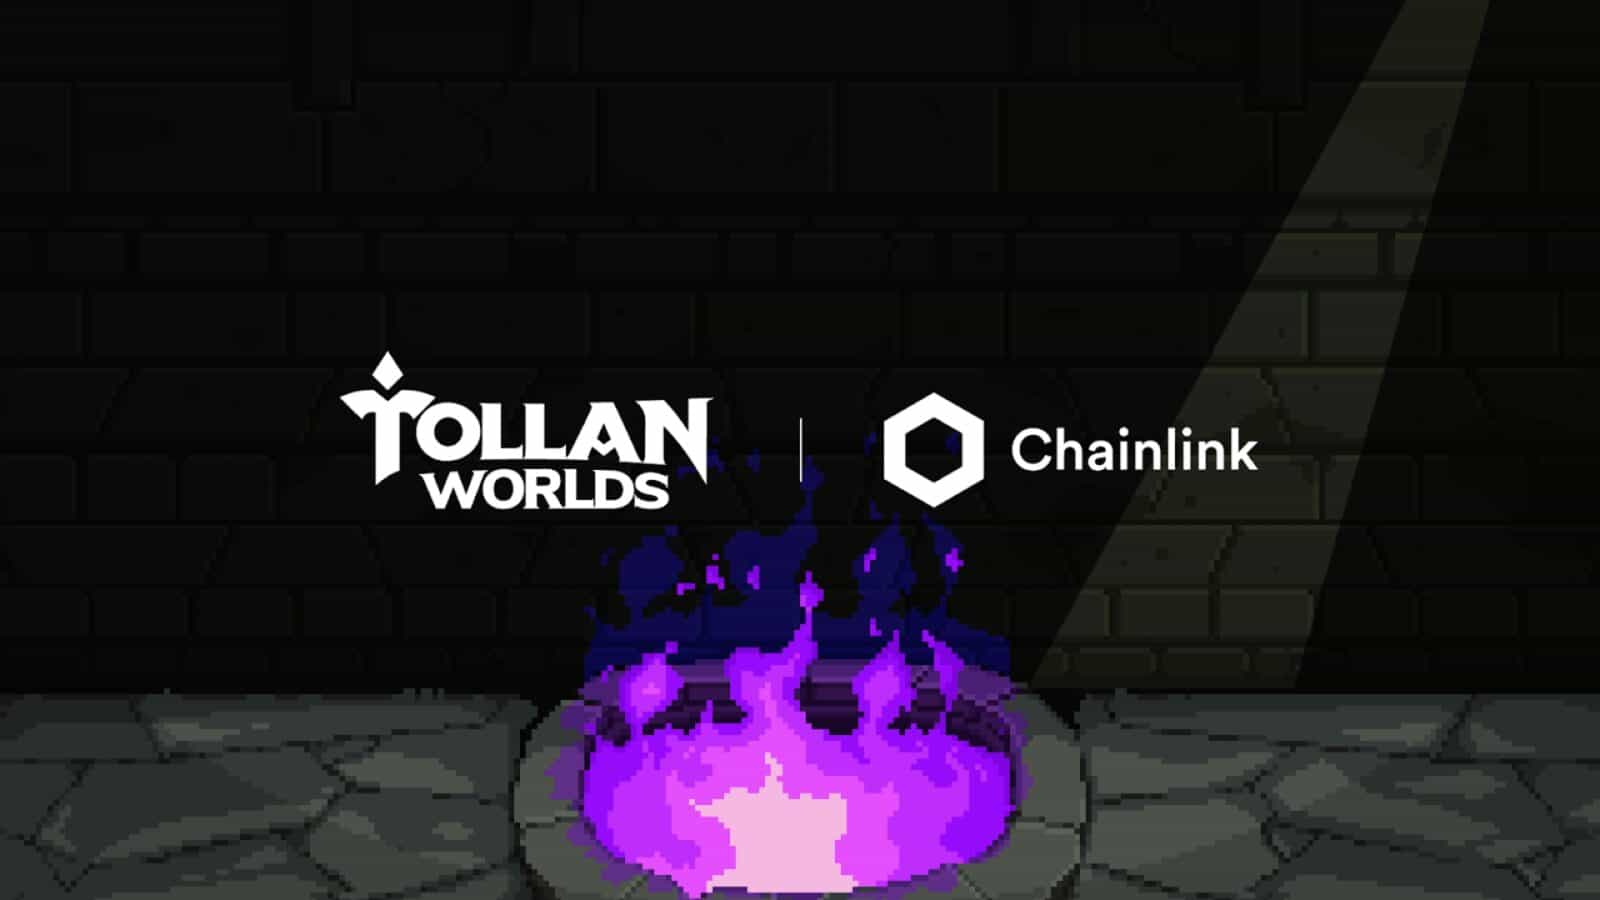 Tollan Worlds Integrate Chainlink VRF to Achieve Transparent In-Game Randomness